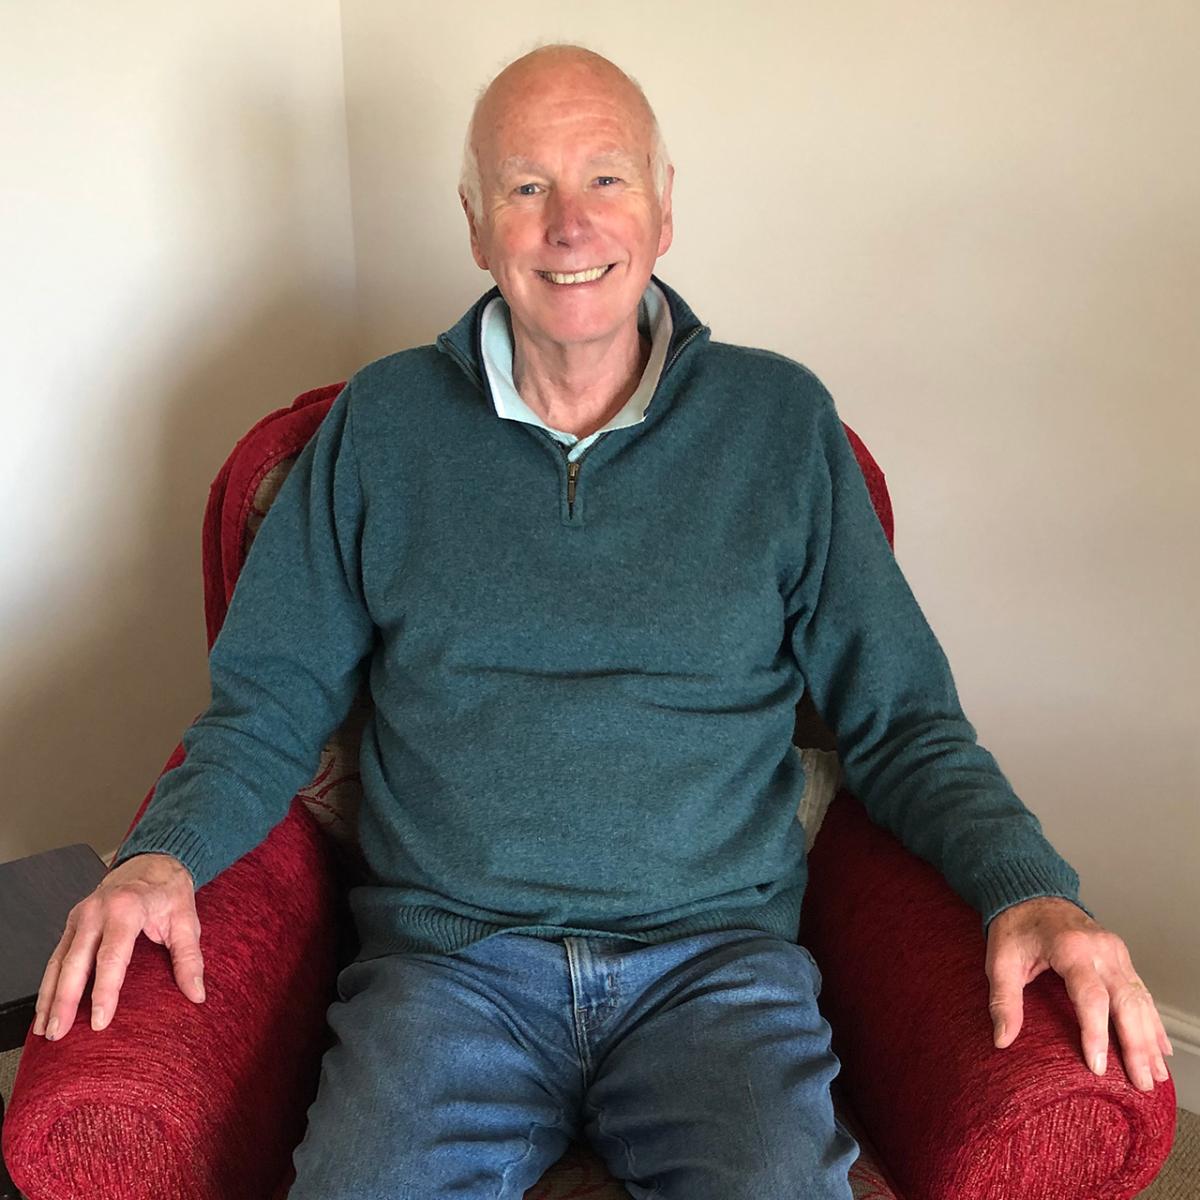 A photograph of Howard Ormerod, showing him sitting in an armchair smiling at the camera. He participated in a National Maritime Museum oral history project